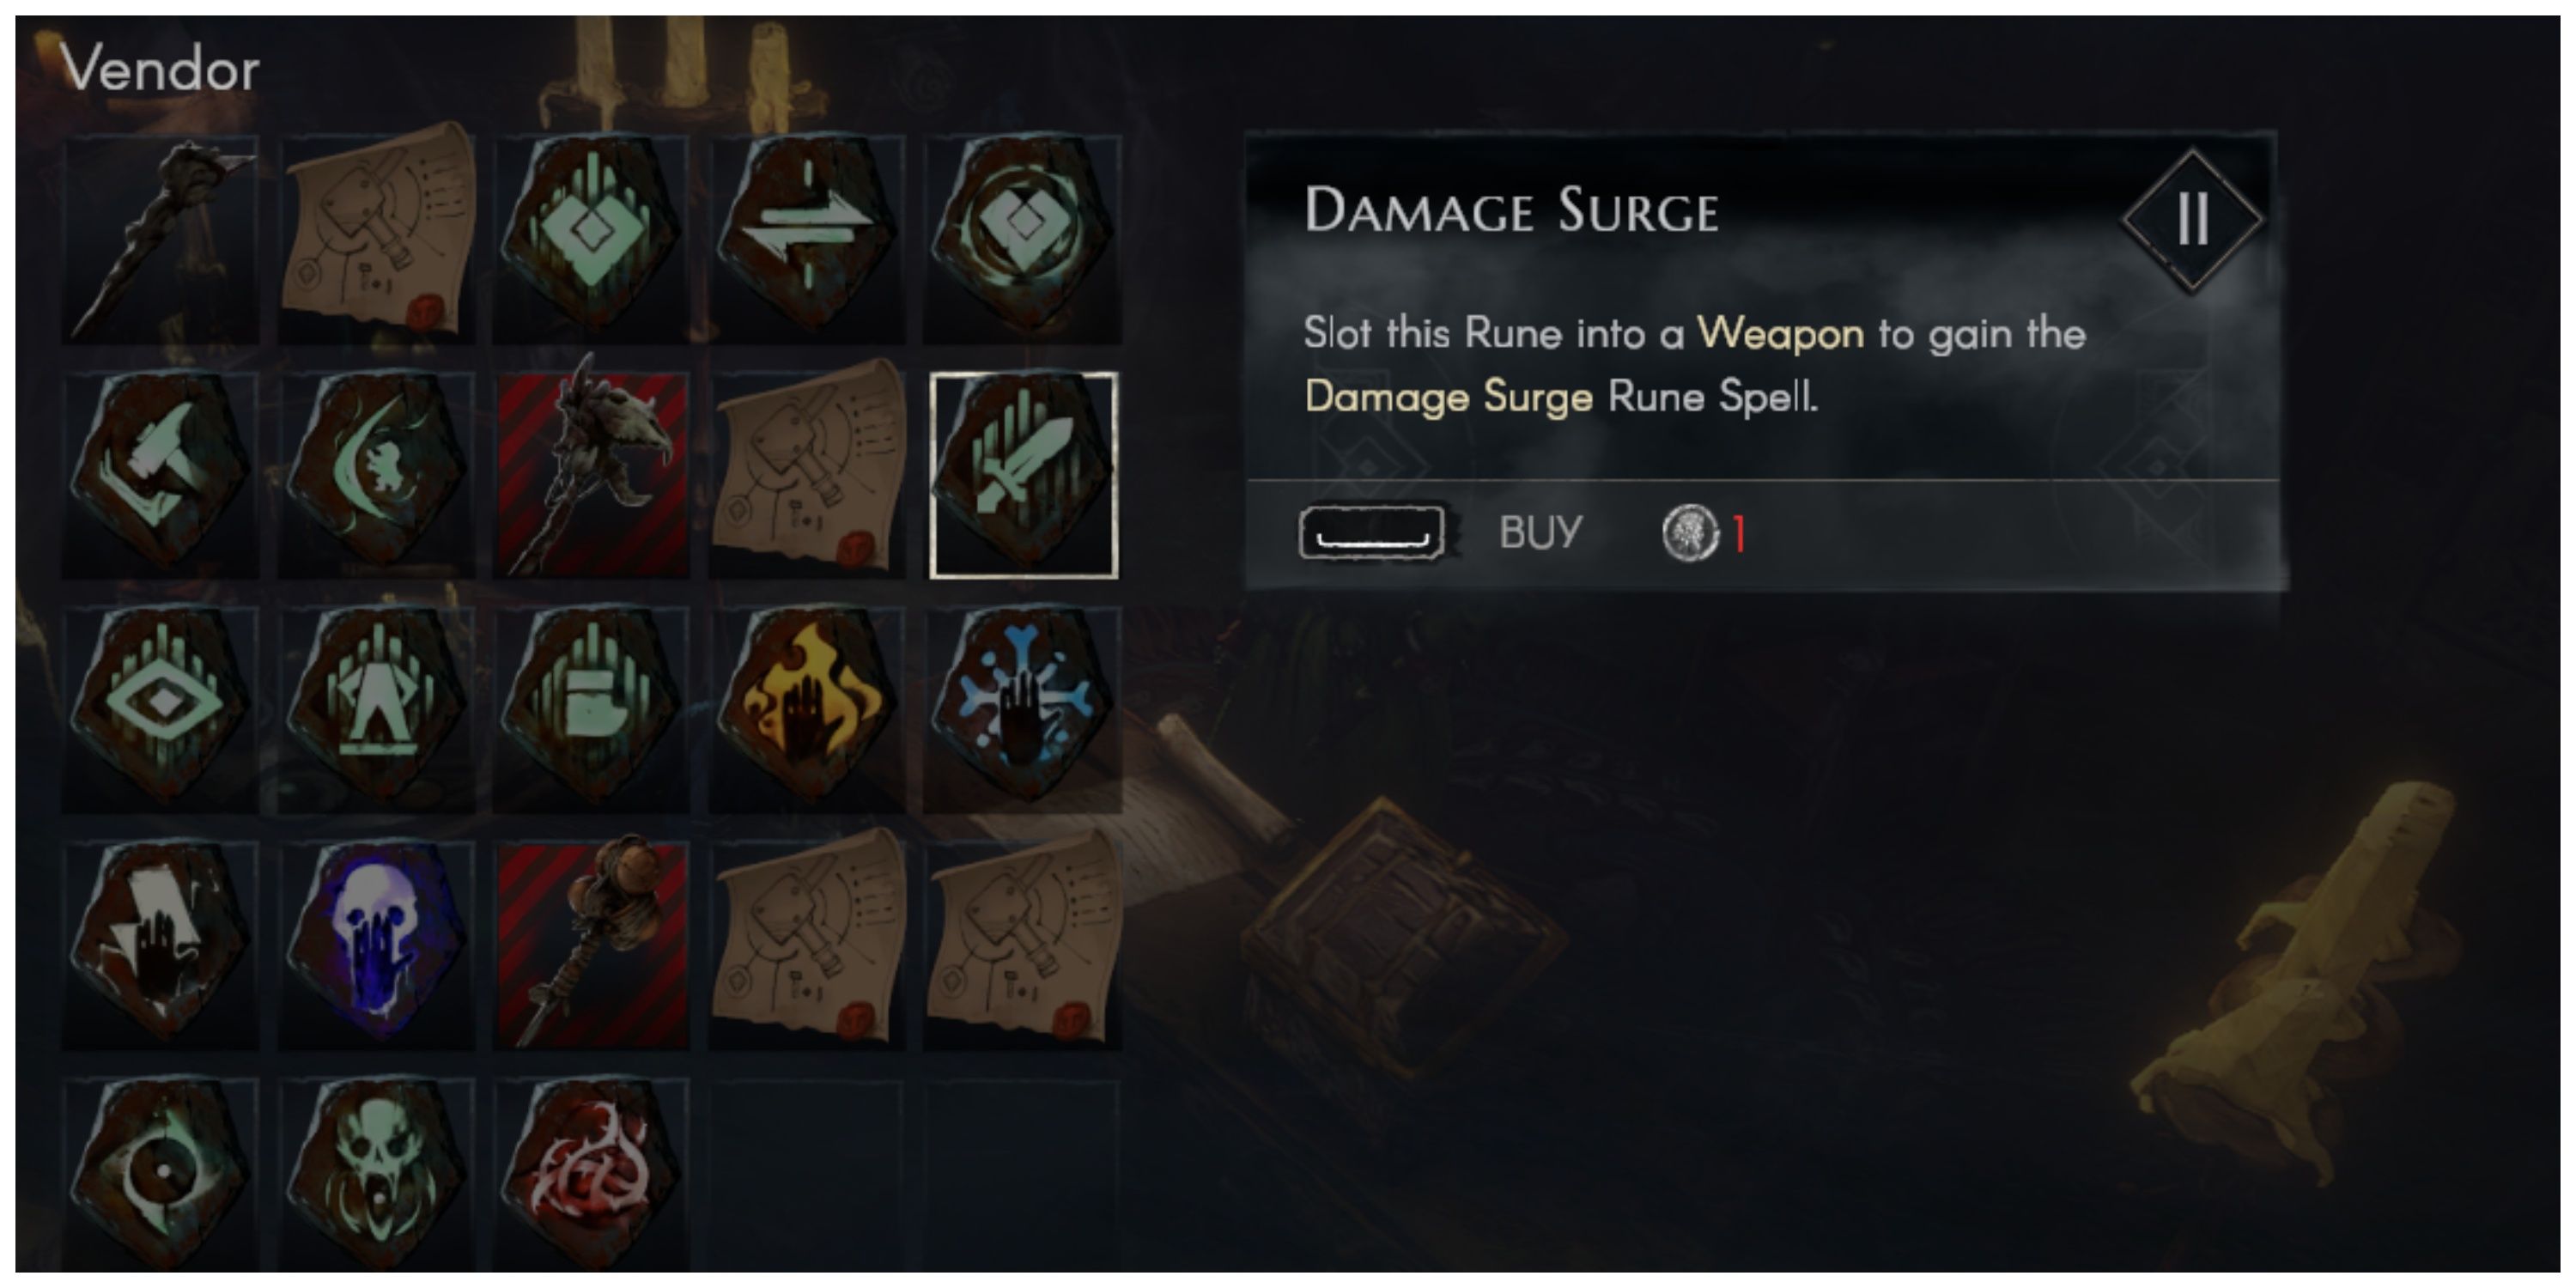 No Rest For The Wicked - Damage Surge Rune